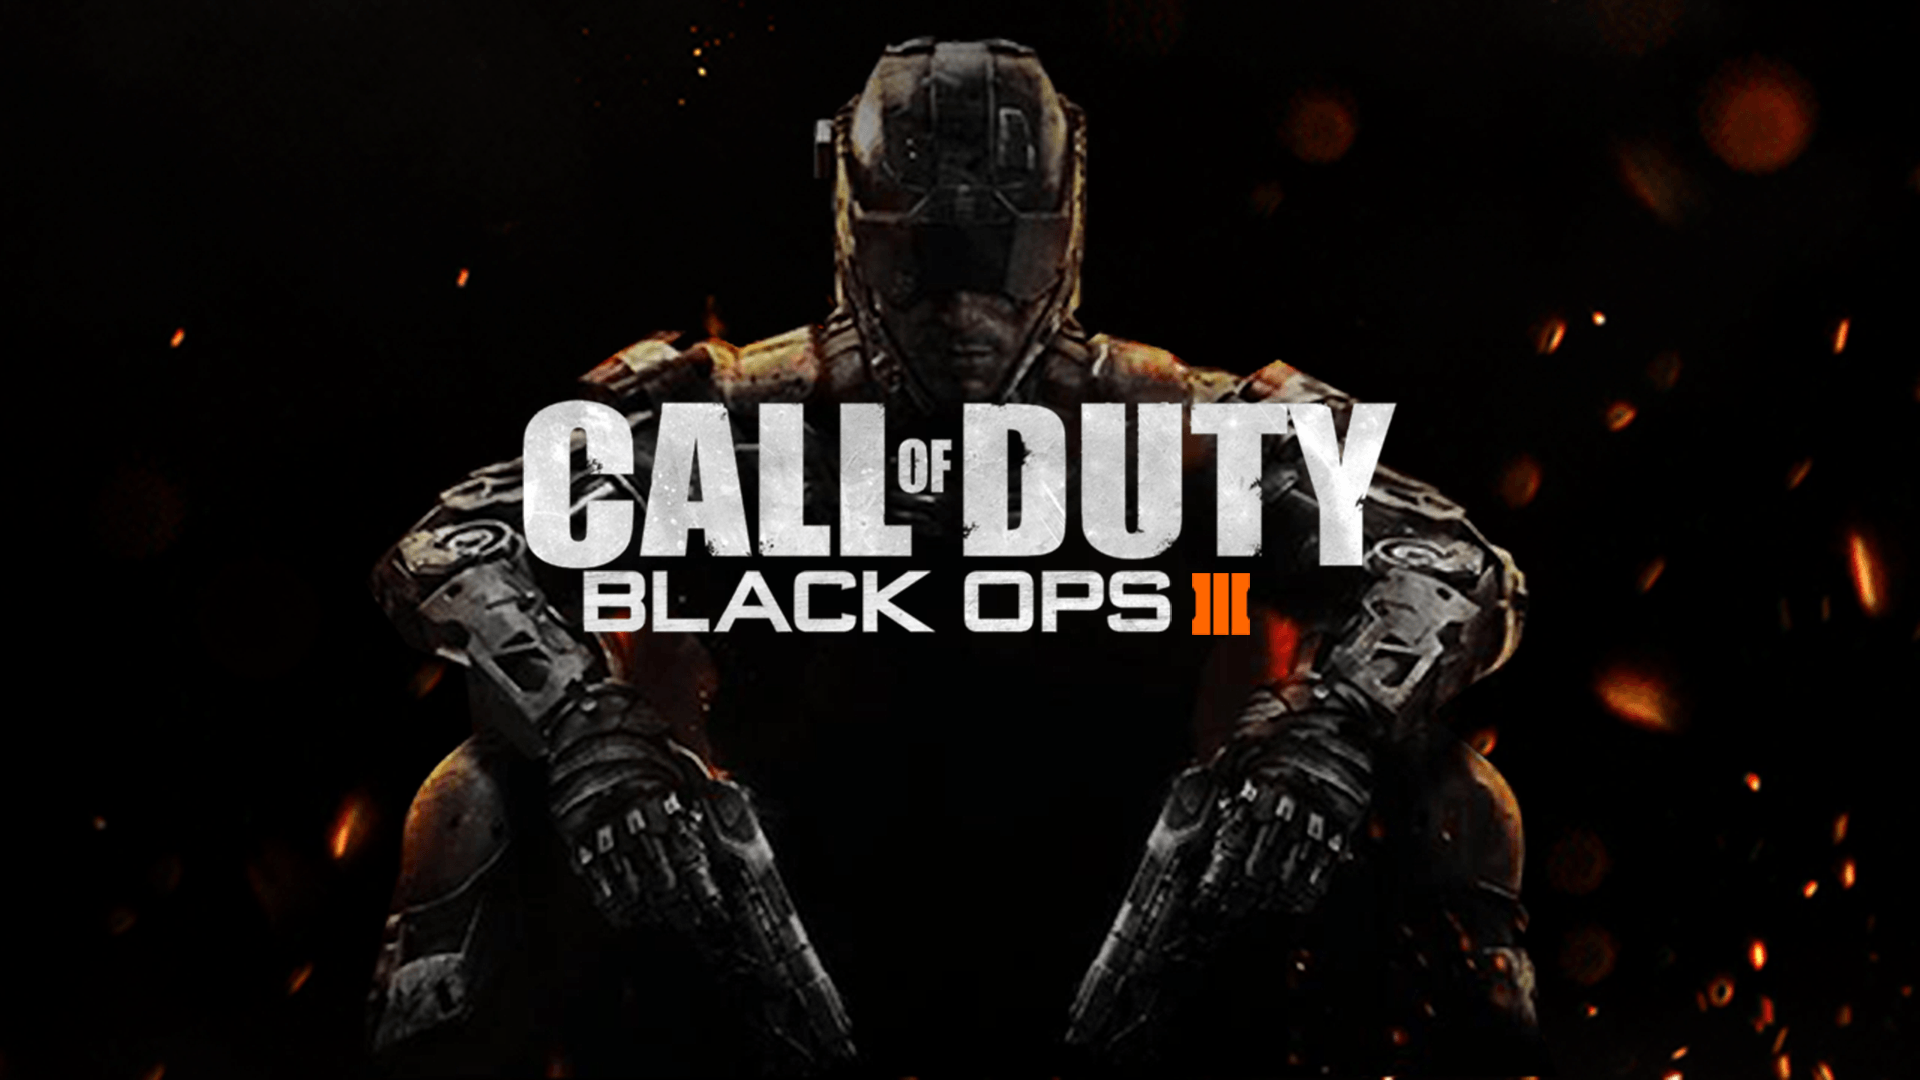 black ops 3 wallpaper hd,action adventure game,pc game,movie,darkness,fictional character